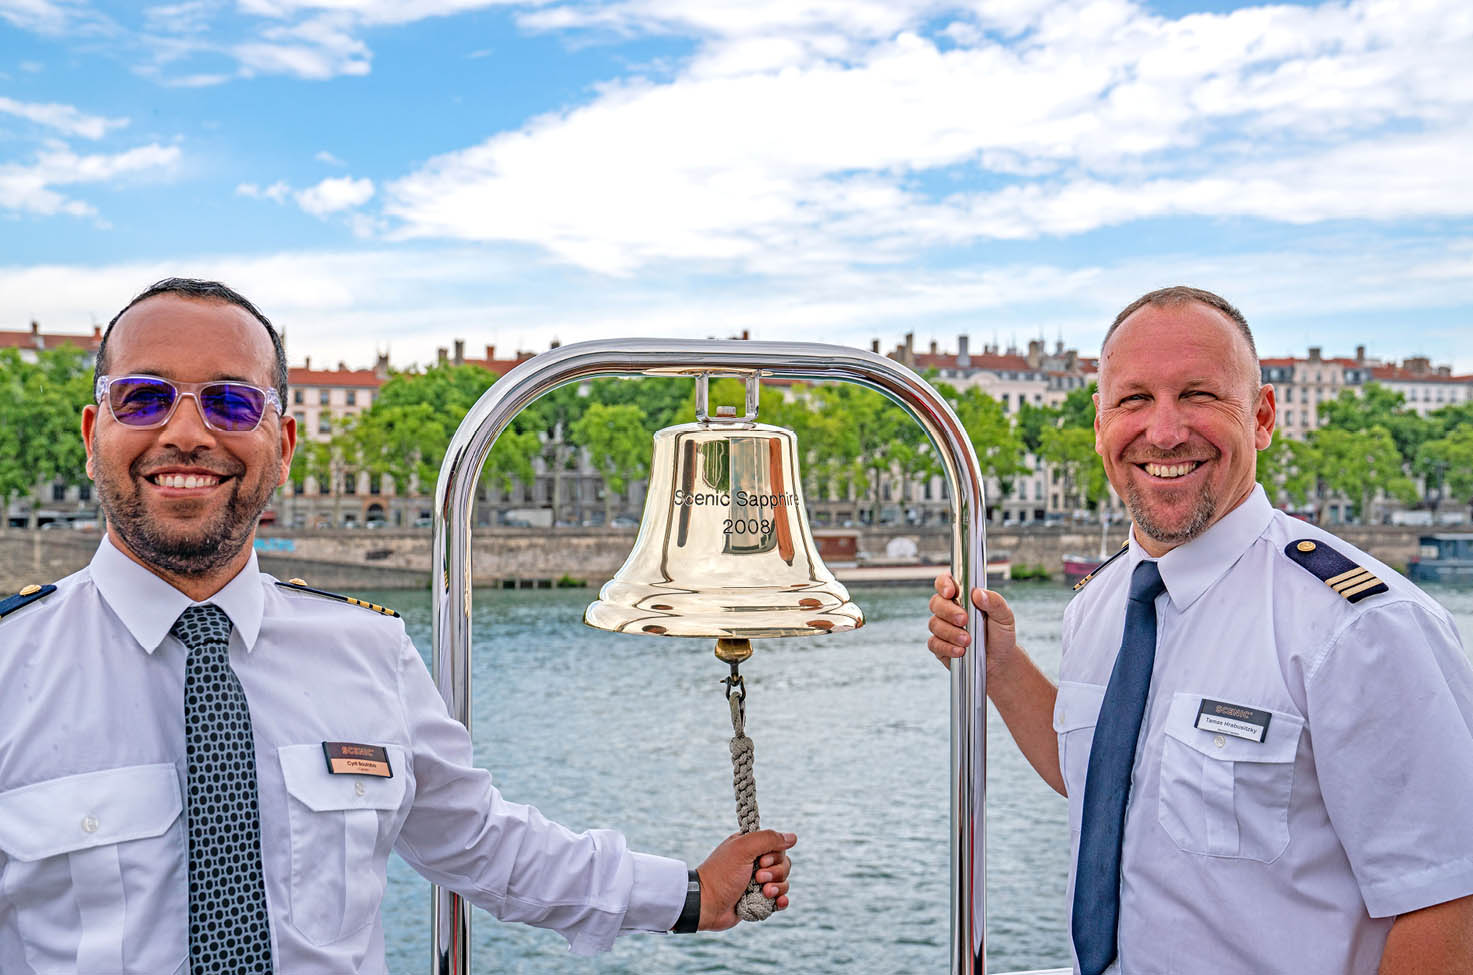 Two captains ringing a bell